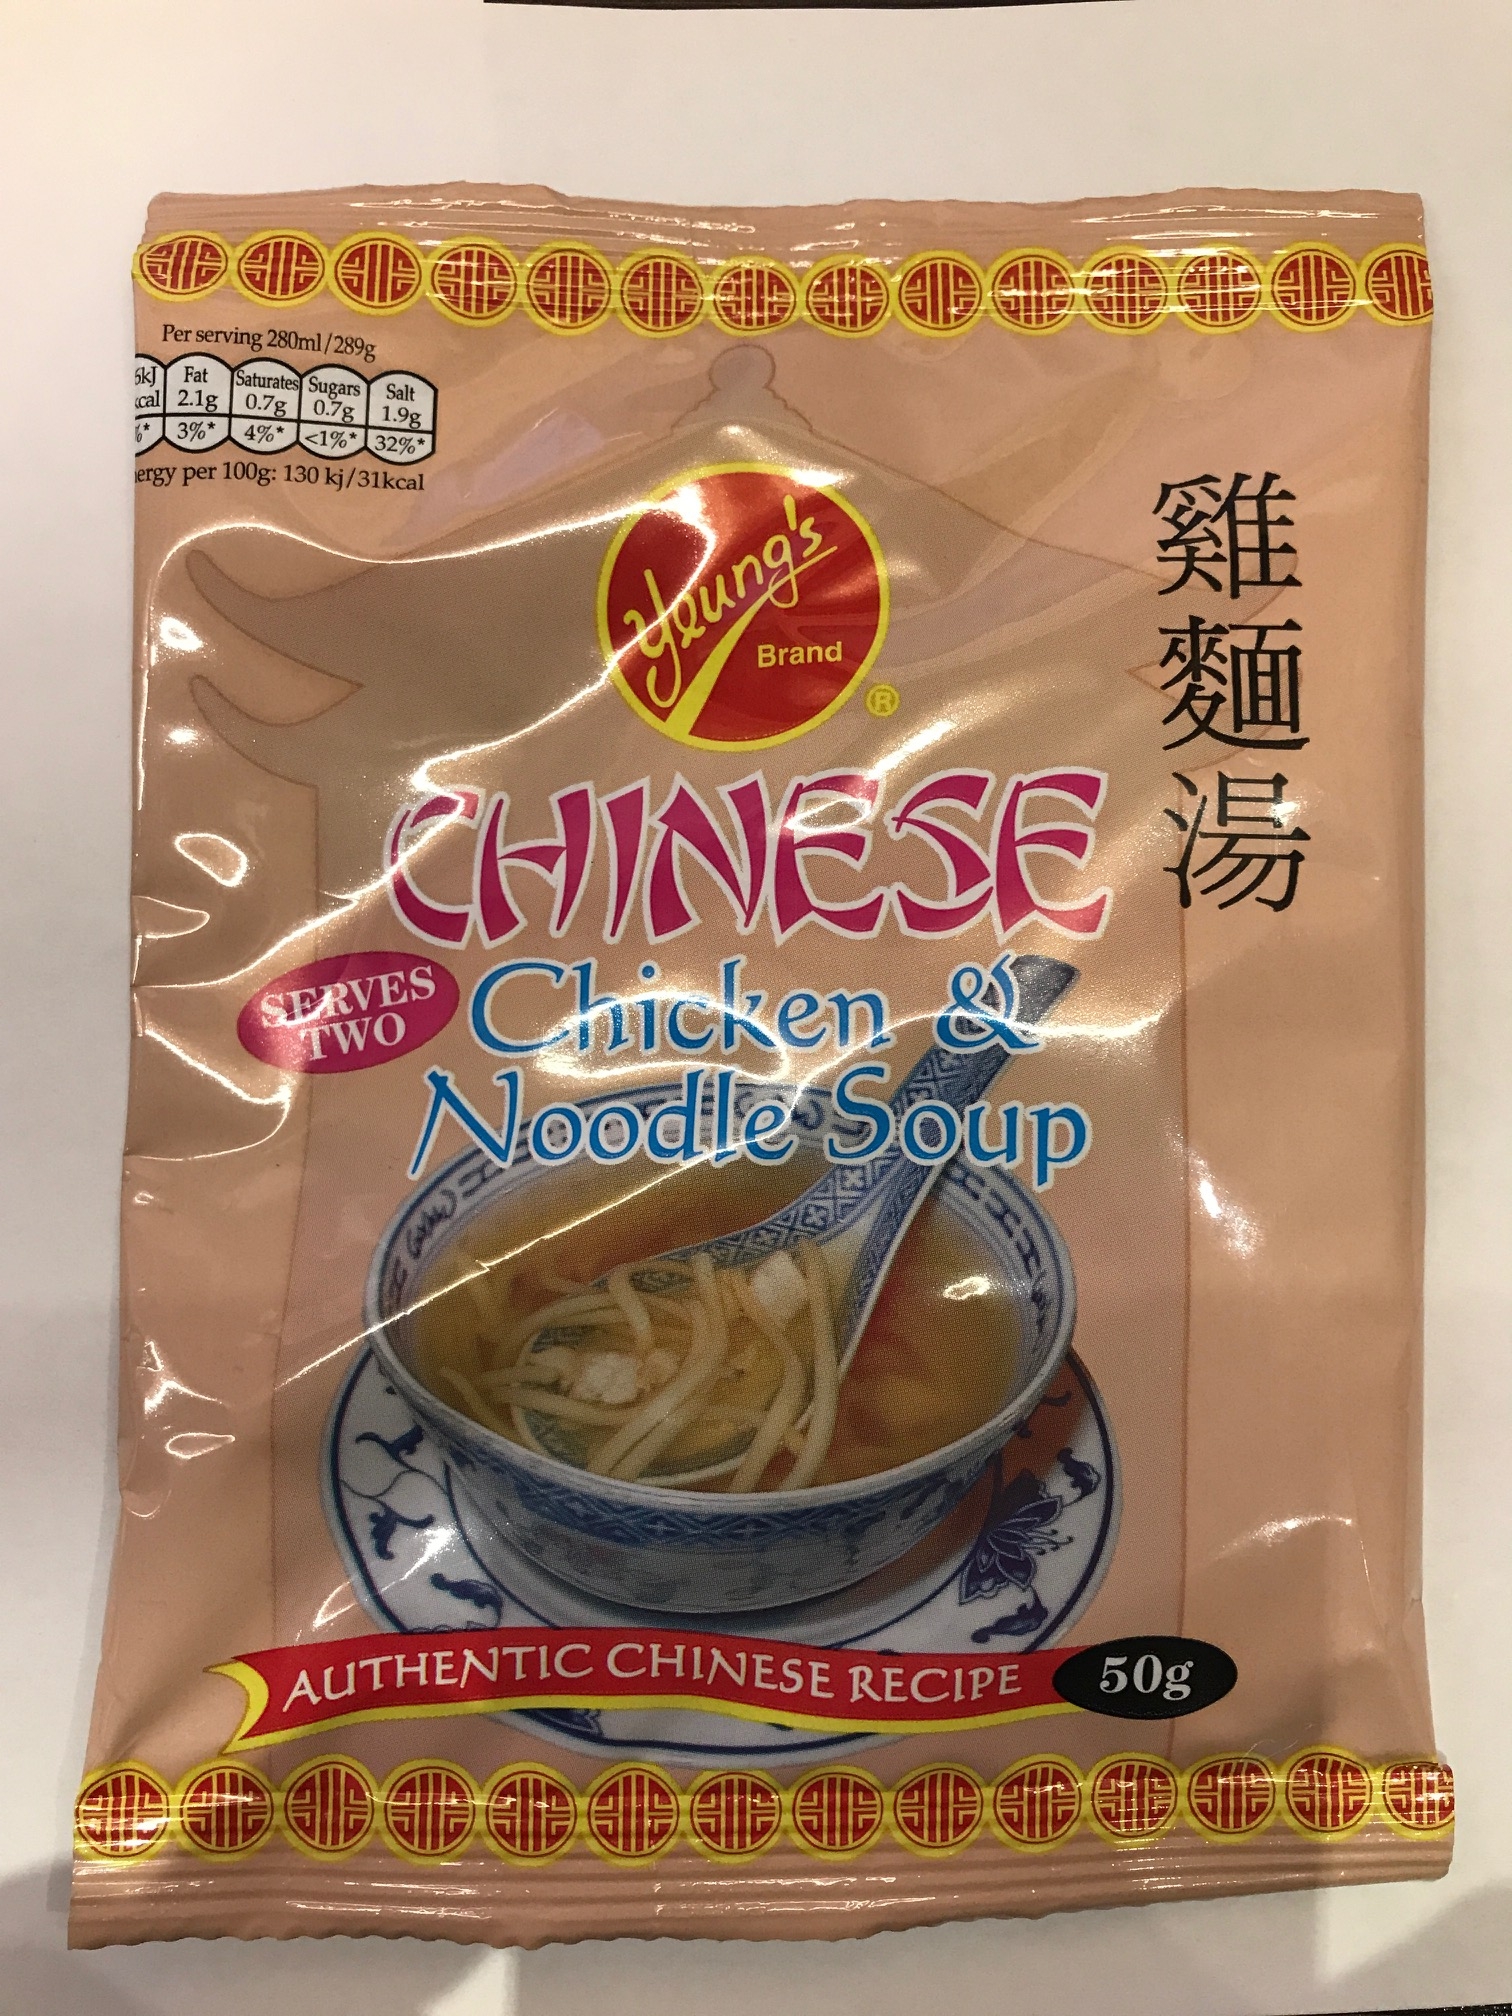 Yeung's Chinese Chicken Noodle Soup Mix (Serves 2) - 50g (10 Packs)